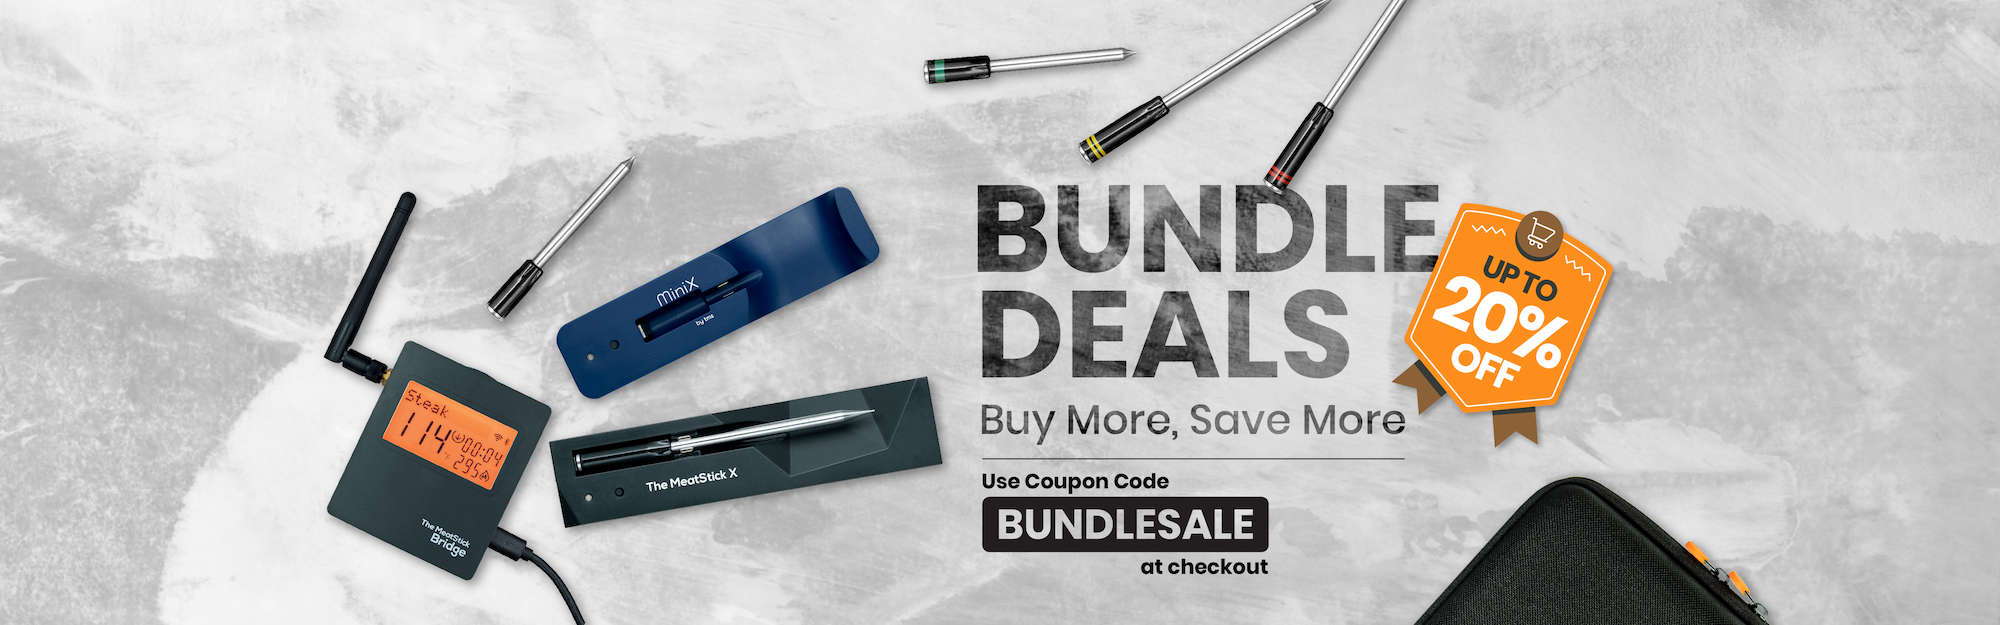 Buy More, Save More with The MeatStick Father's Day Sale Bundle Deals